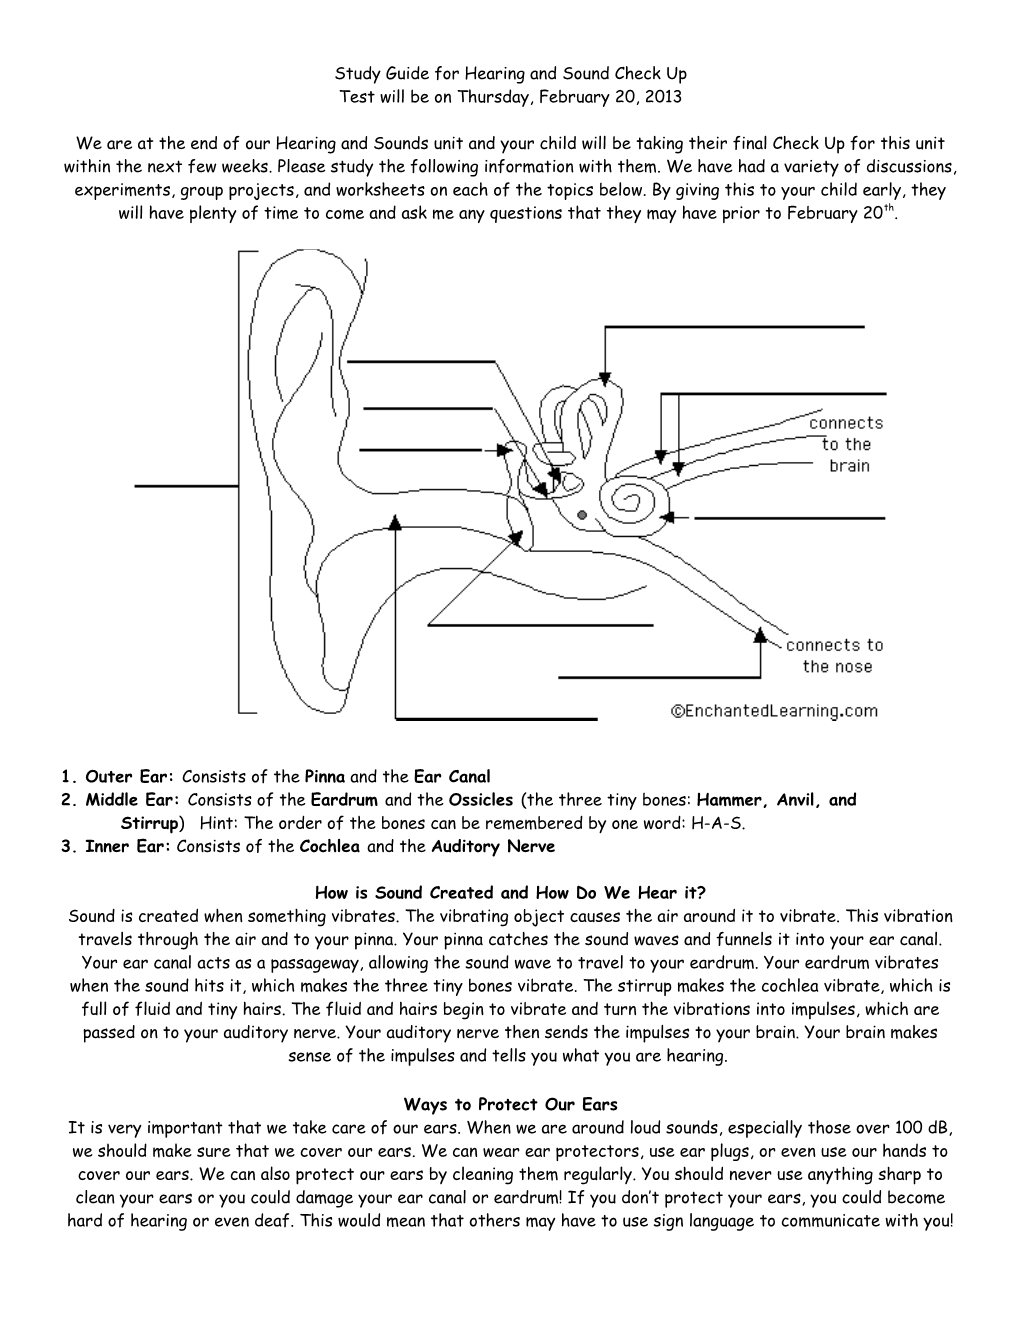 Study Guide for Hearing and Sound Check Up